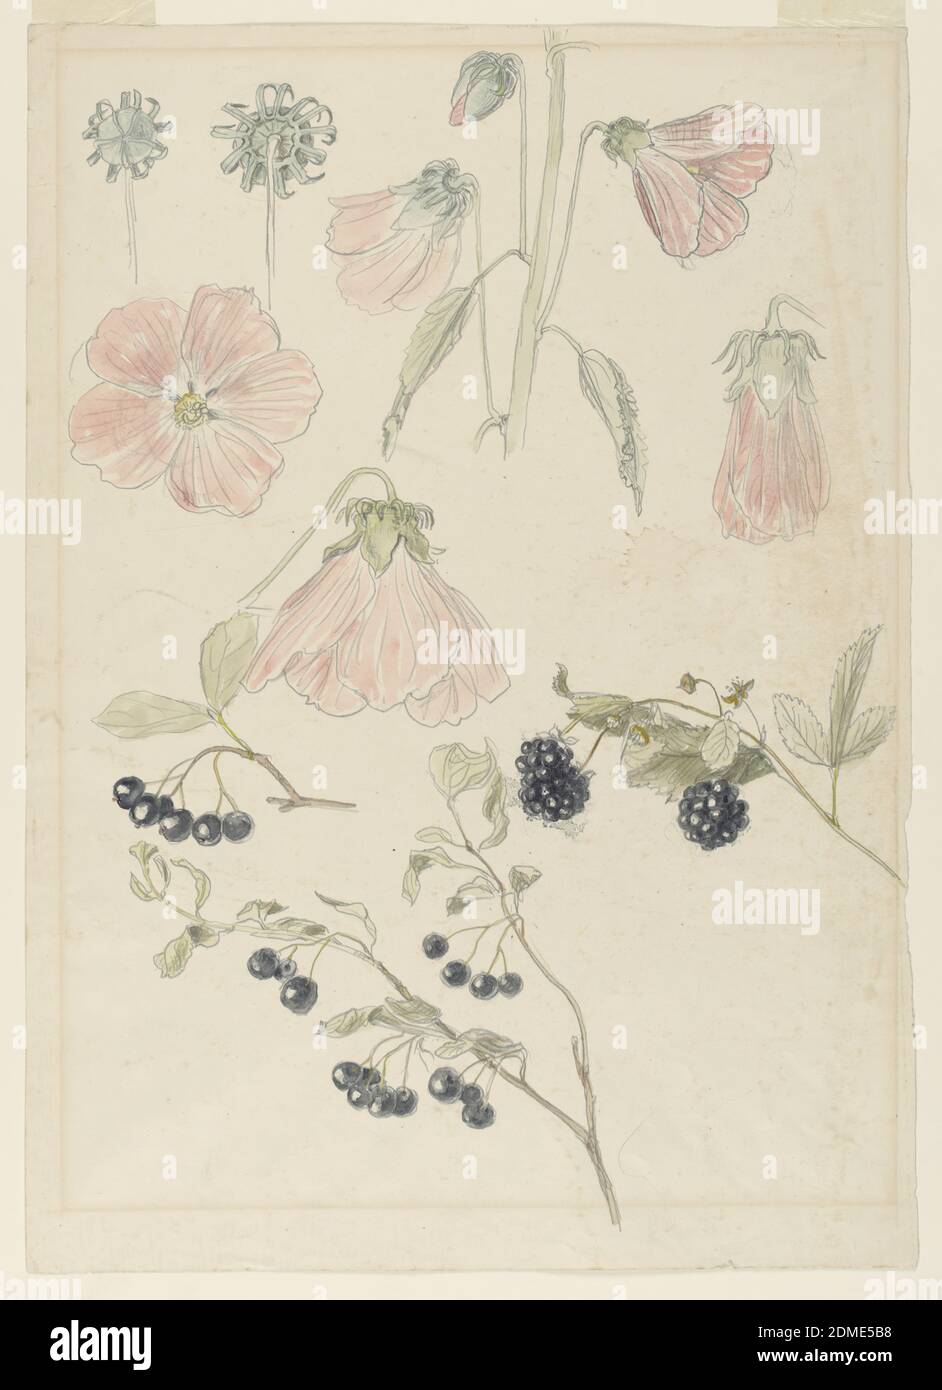 Botanical Detail Studies: Hollyhocks, Blueberries, and Blackberries, Samuel Colman, American, 1832–1920, Brush and watercolor, graphite on paper, Botanical detail studies. Top and left center: six designs of details of a hollyhock. A part of a plant with an unfolding bud, two petals and two leaves, a bud, a calyx and two petals are shown. Bottom left: two designs of parts of a blueberry bush with berries and leaves. Right center: A blackberry bough., USA, 1875–80, nature studies, Drawing Stock Photo